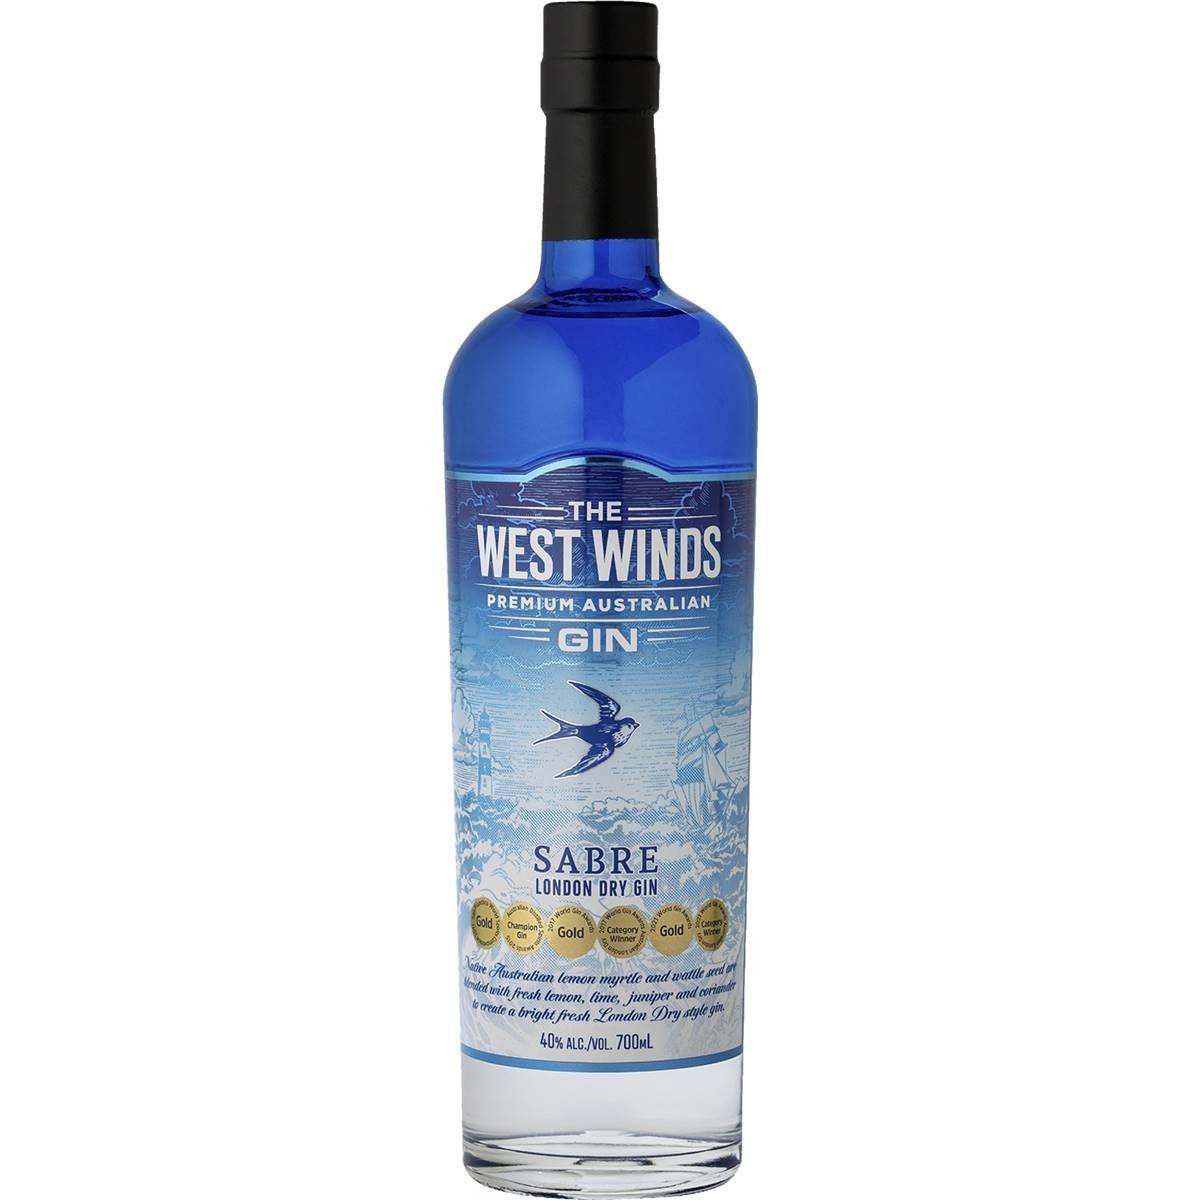 WEST WINDS GIN SABRE 700ML